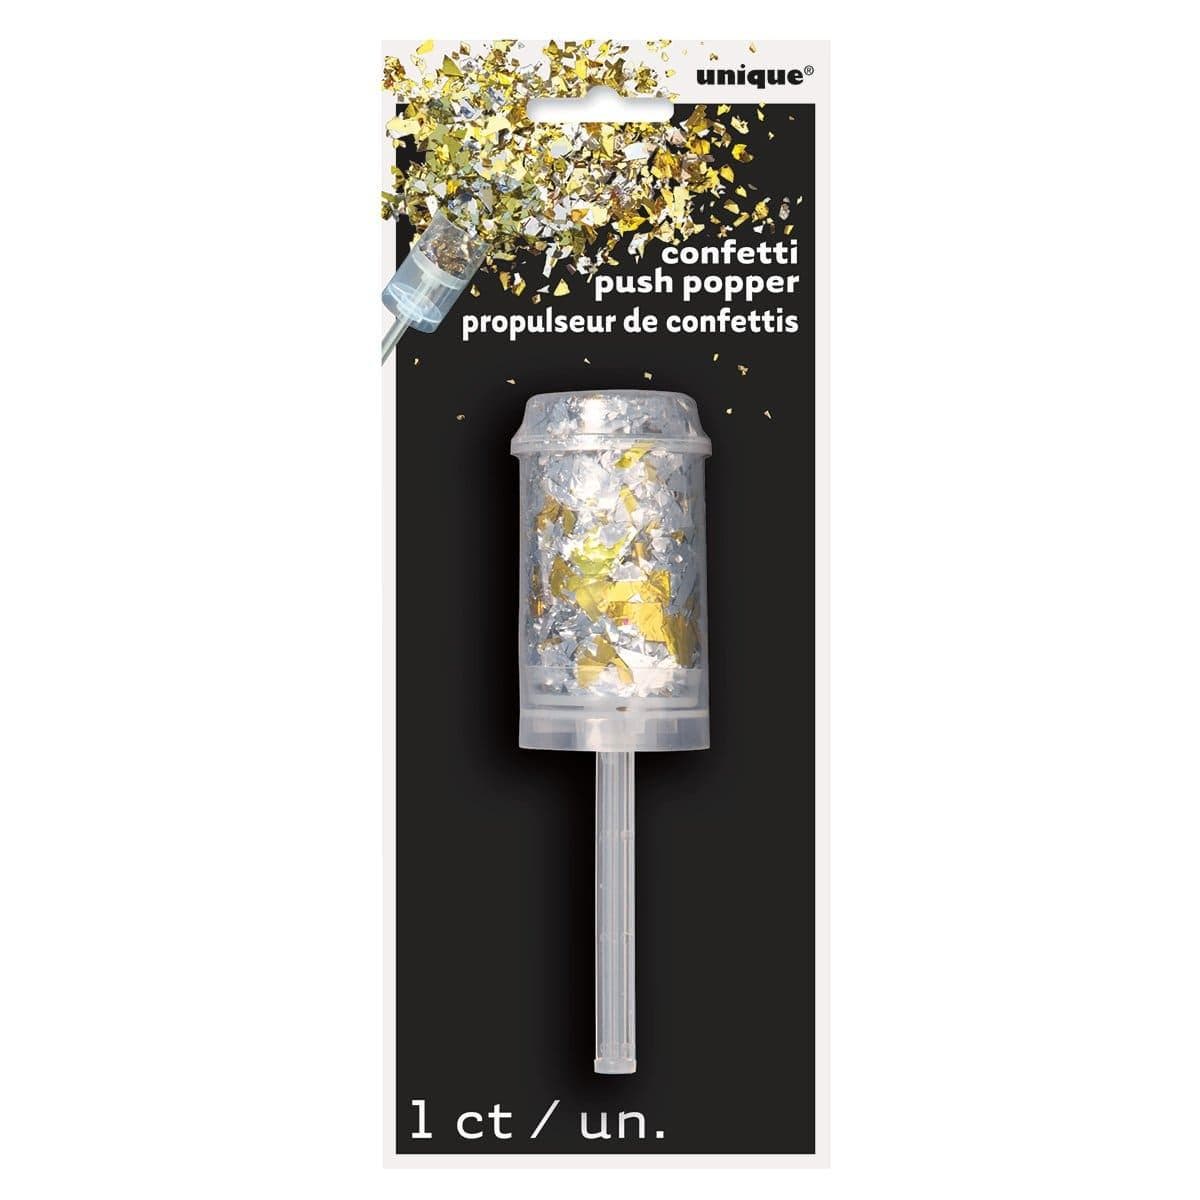 Buy Novelties Confetti Plush Popper - Gold Silver sold at Party Expert